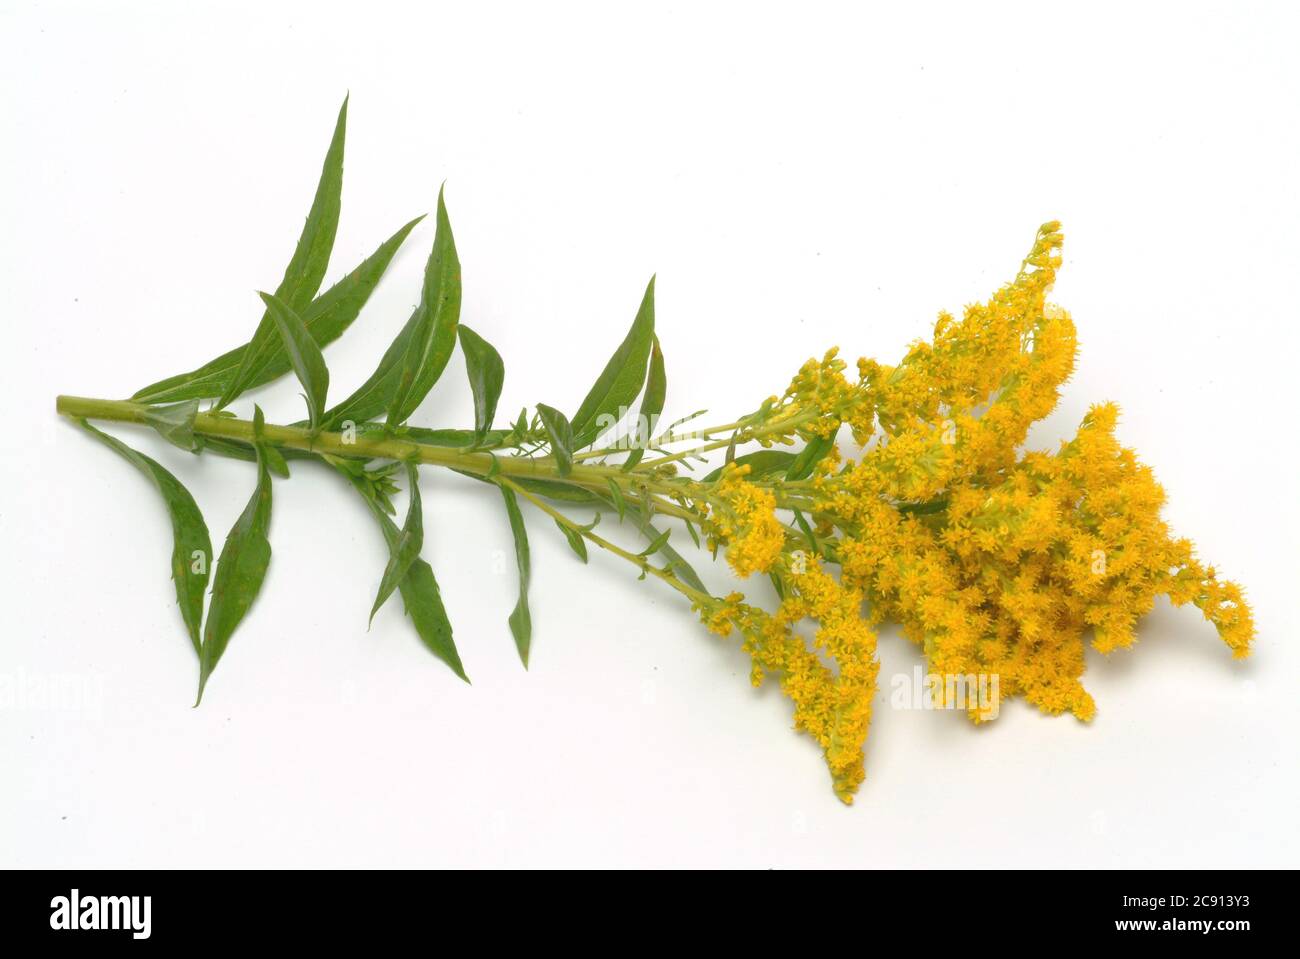 Common goldenrod, common goldenrod or Real goldenrod, Solidago virgaurea. Goldenrod is used as a medicinal herb for bladder disease and kidney disease Stock Photo